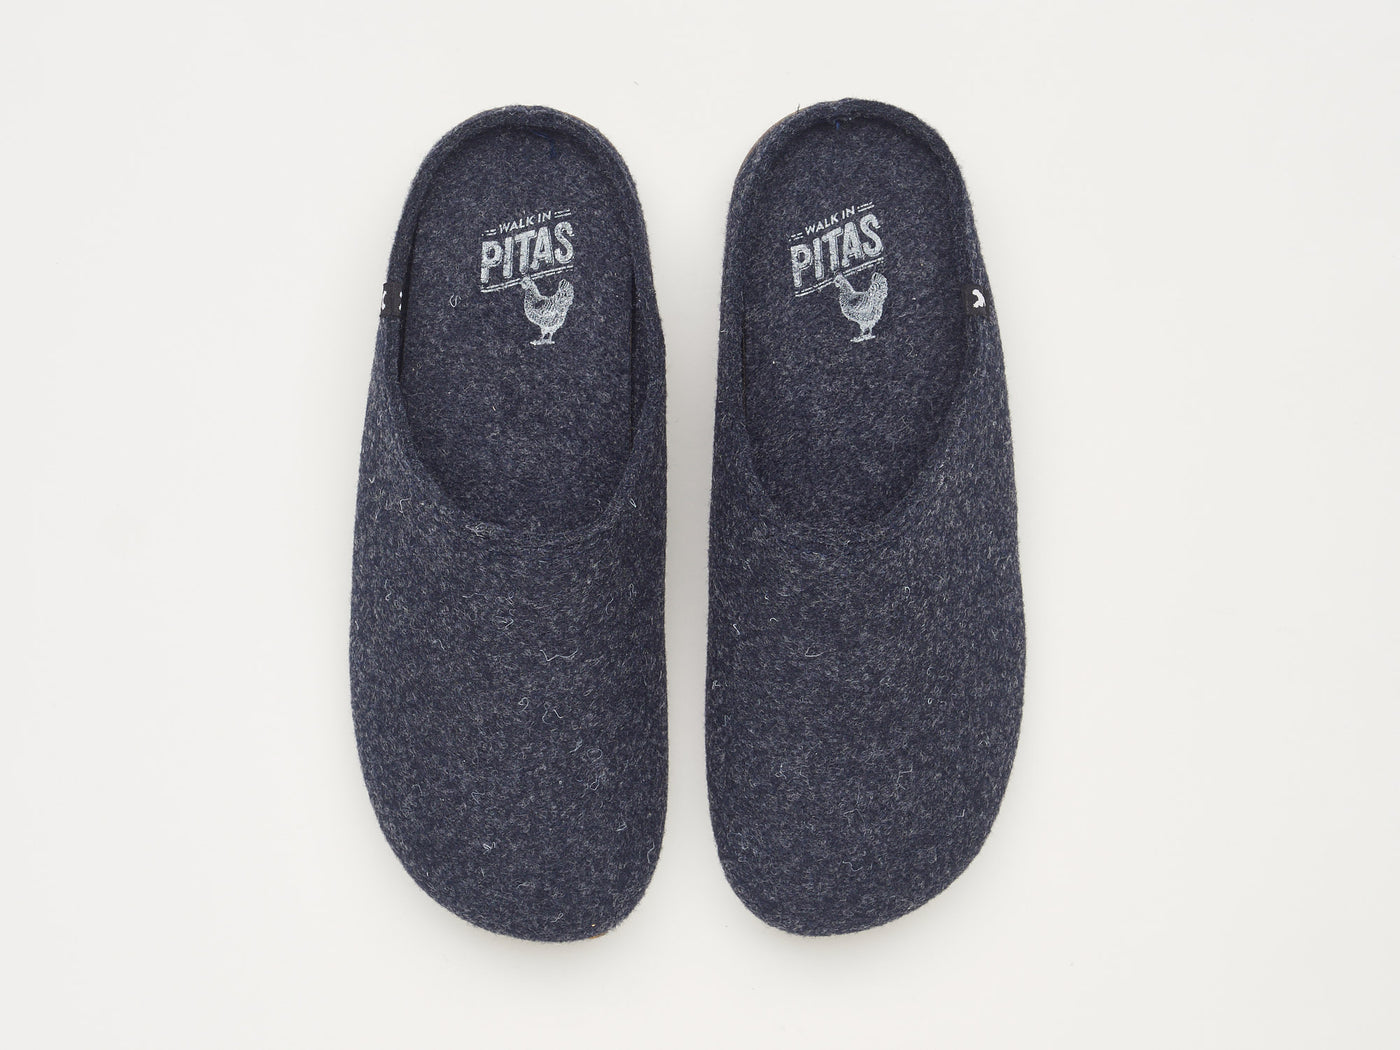 Soft eco felt mule slippers, rubber soles, 100% recycled